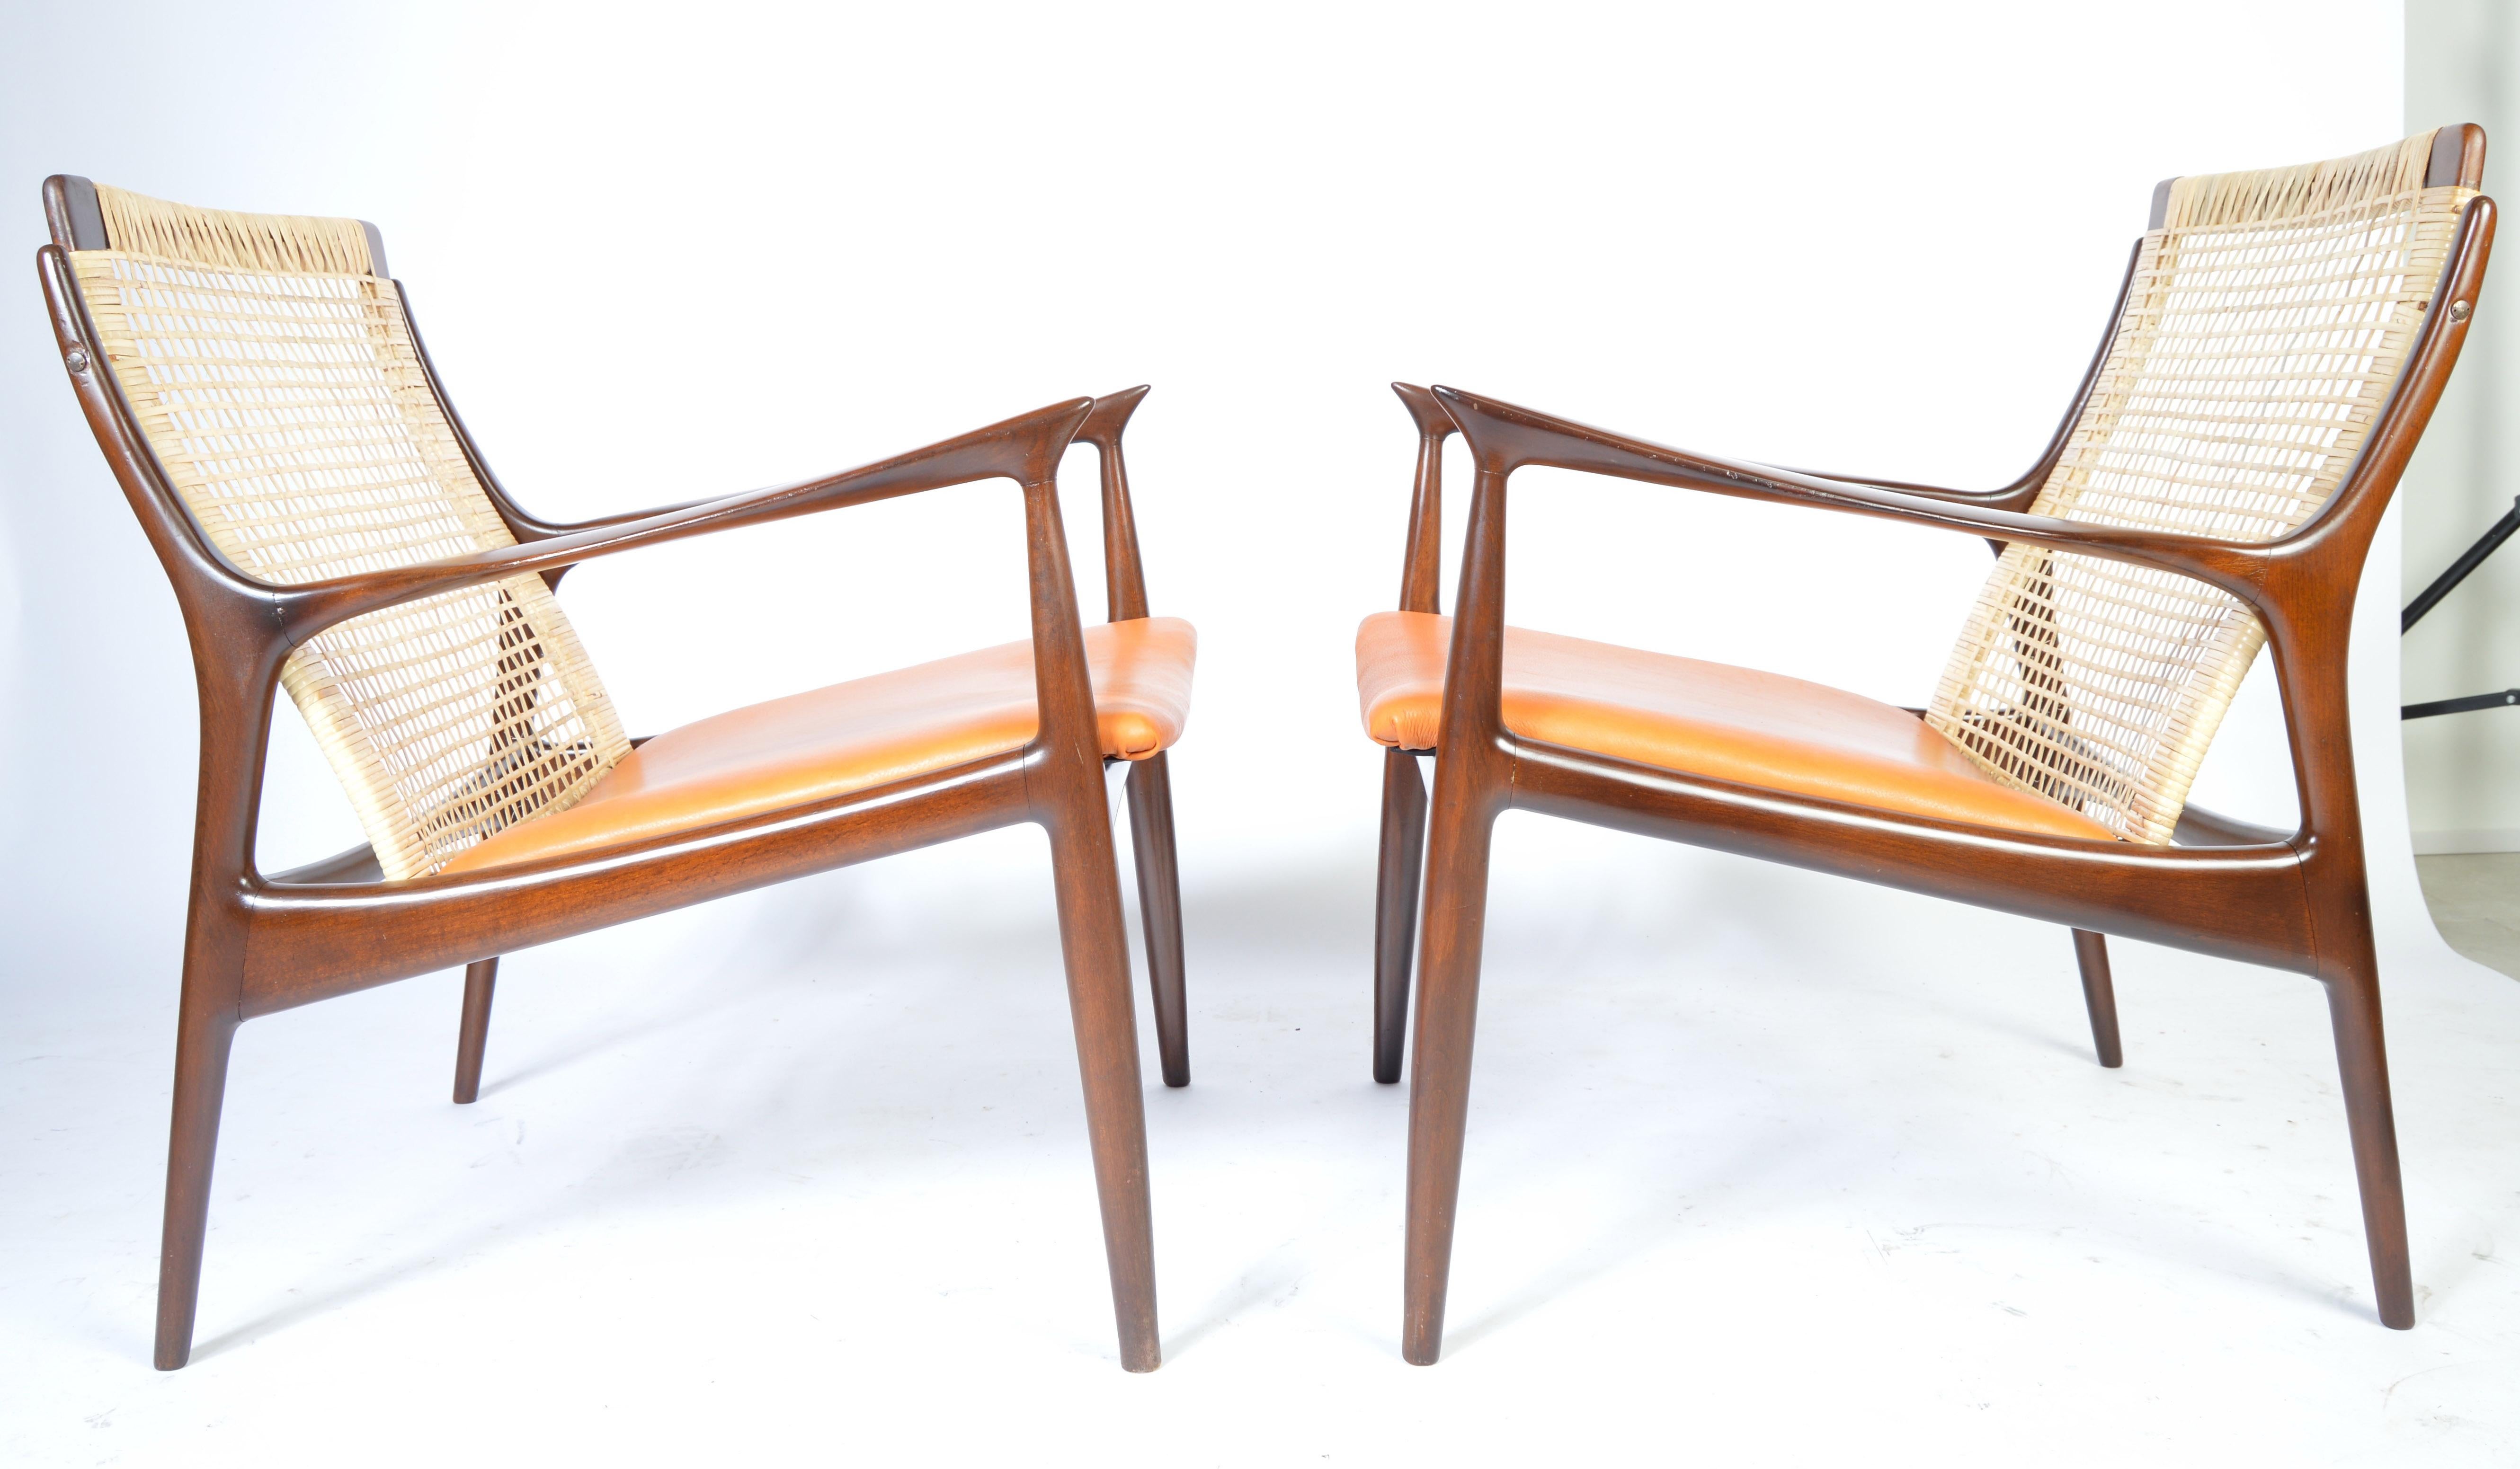 A stunning pair of IB Kofod Larsen easy chairs having cane backs, mahogany frames and supple vegetable dyed burnt orange seats.
Mint condition cane backrests.
Newly treated and well maintained mahogany frames.
Mild signs of use to leather.